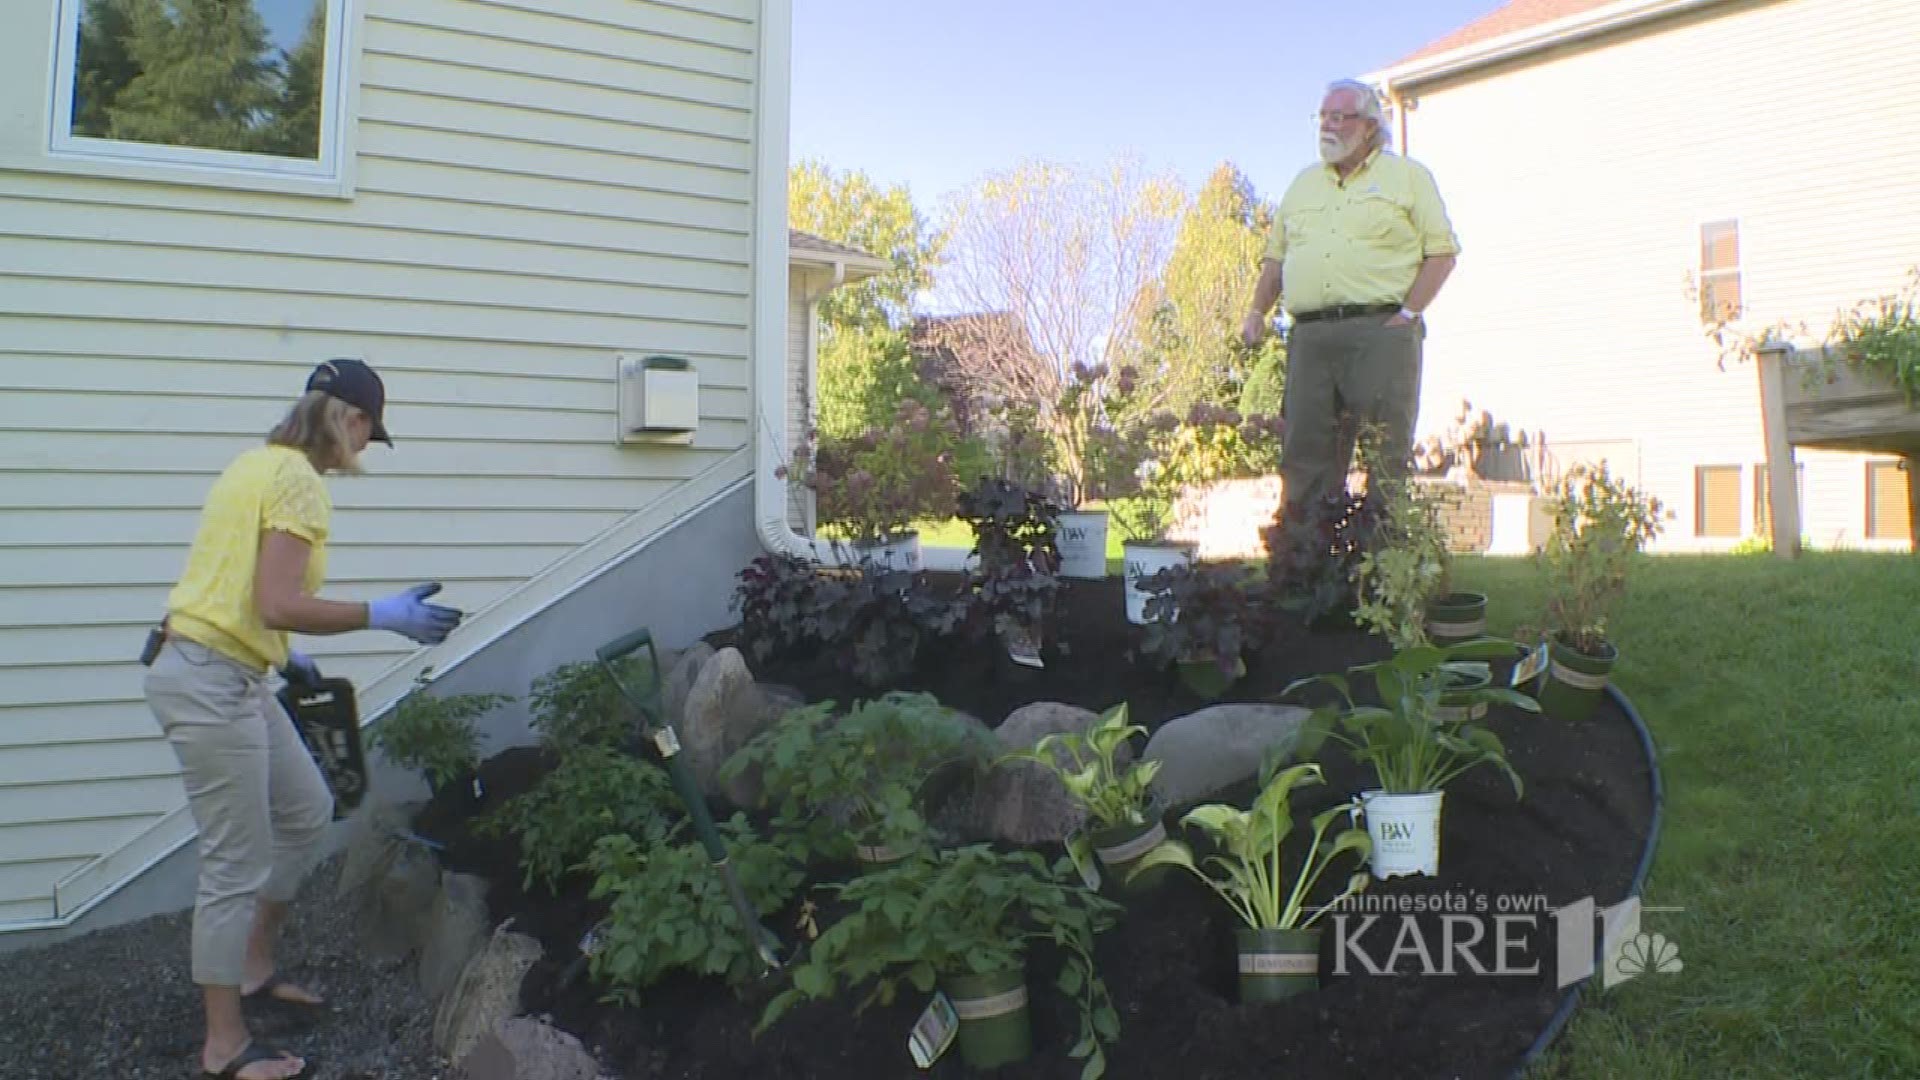 This week's Grow with KARE took place in Randy Shaver's backyard of all places! http://kare11.tv/2fhAOmE